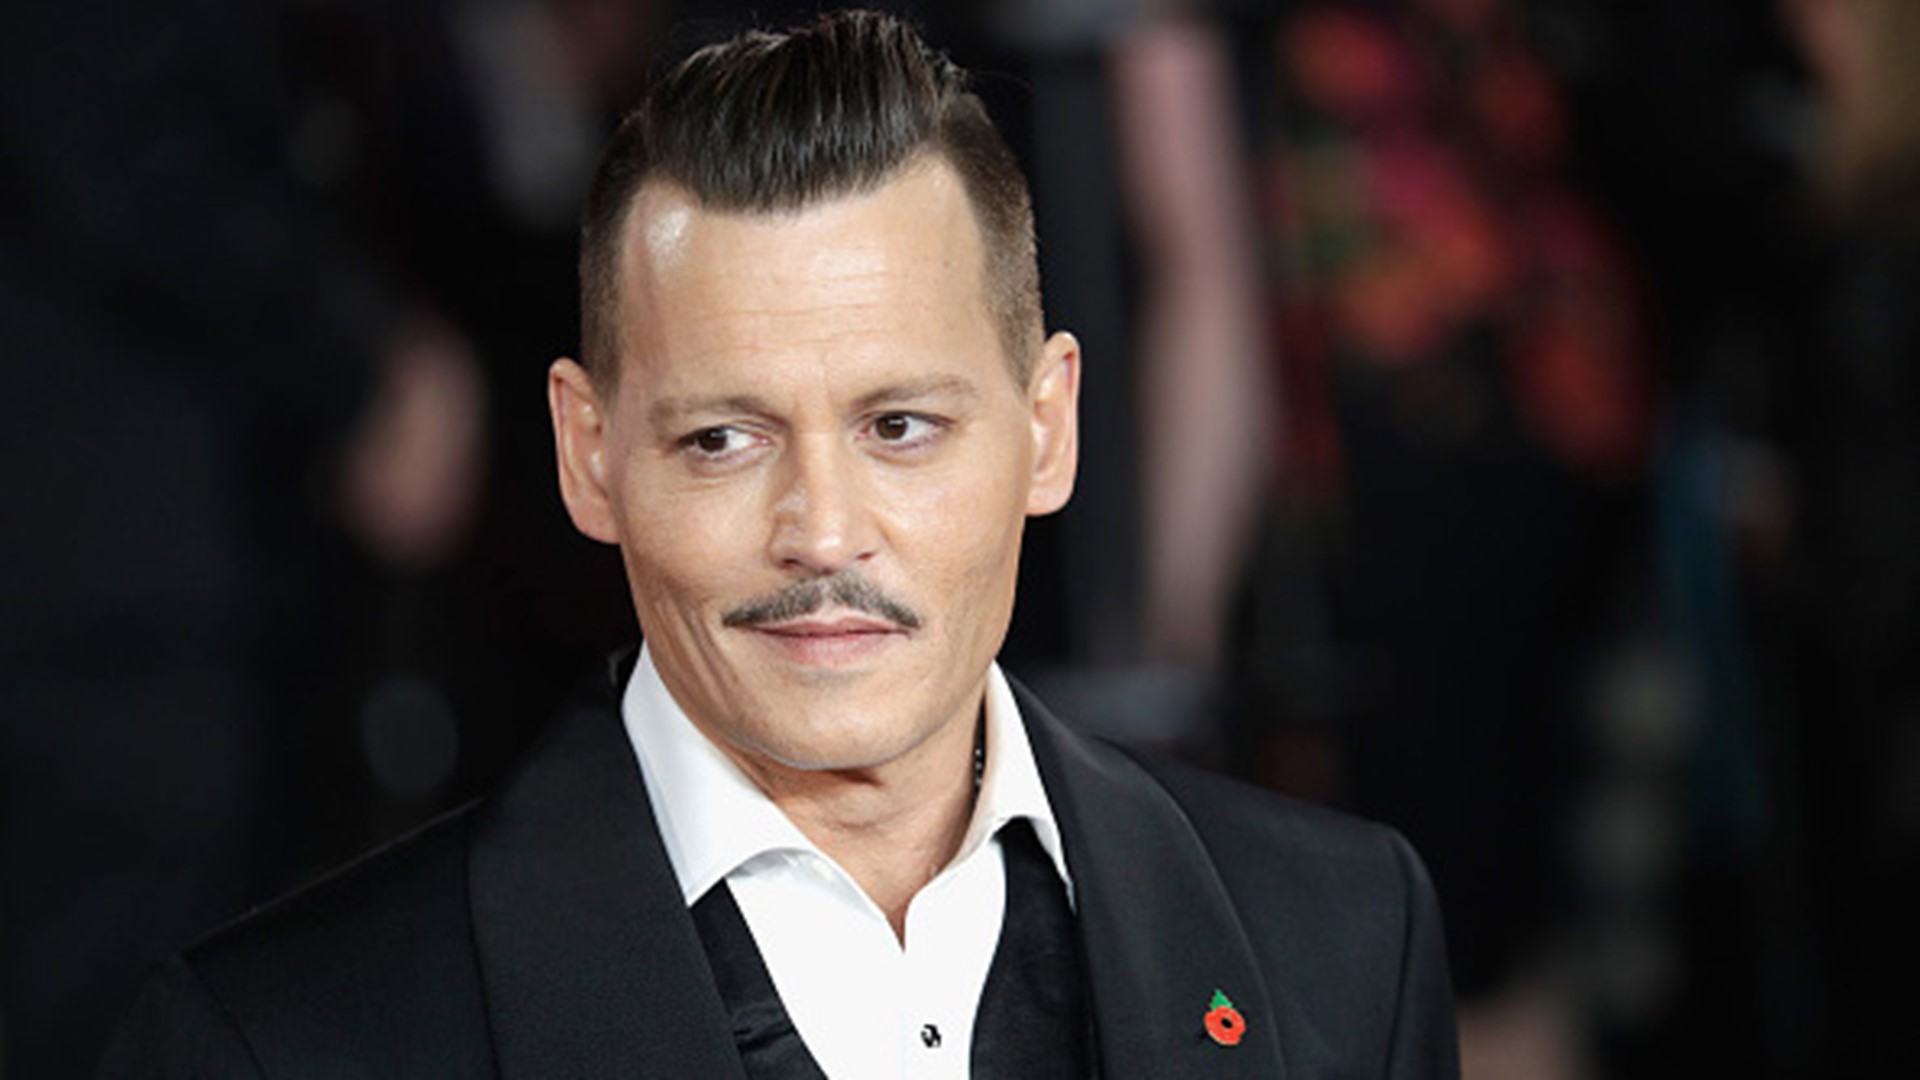 Johnny Depp looks shockingly thin in new photos, and fans are worried